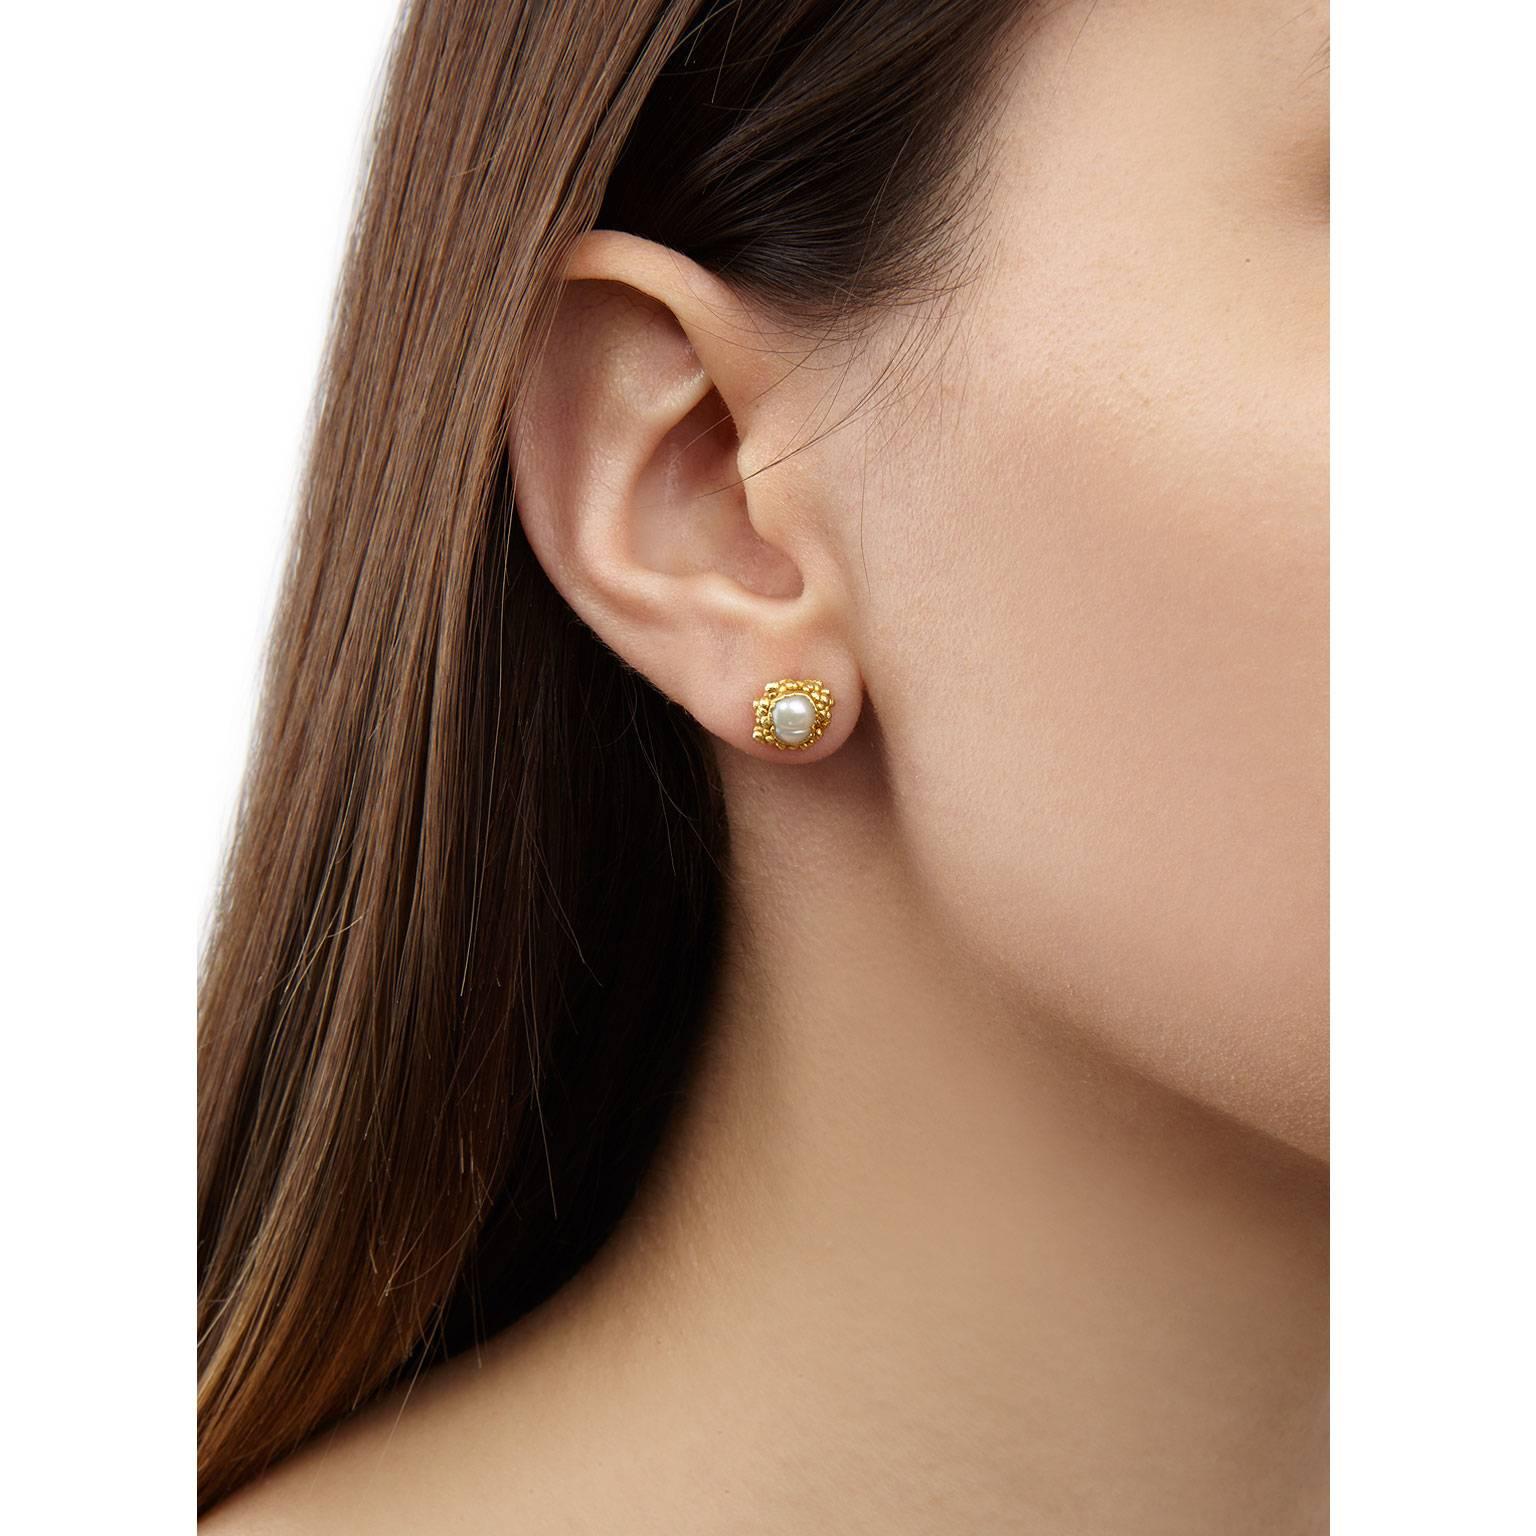 Perfect for everyday wear, the Ursula studs feature beautiful white freshwater baroque pearls encrusted in granules of gold plated silver.

Pearls may vary in size and shape as each one is unique.

Handmade in London, England.
